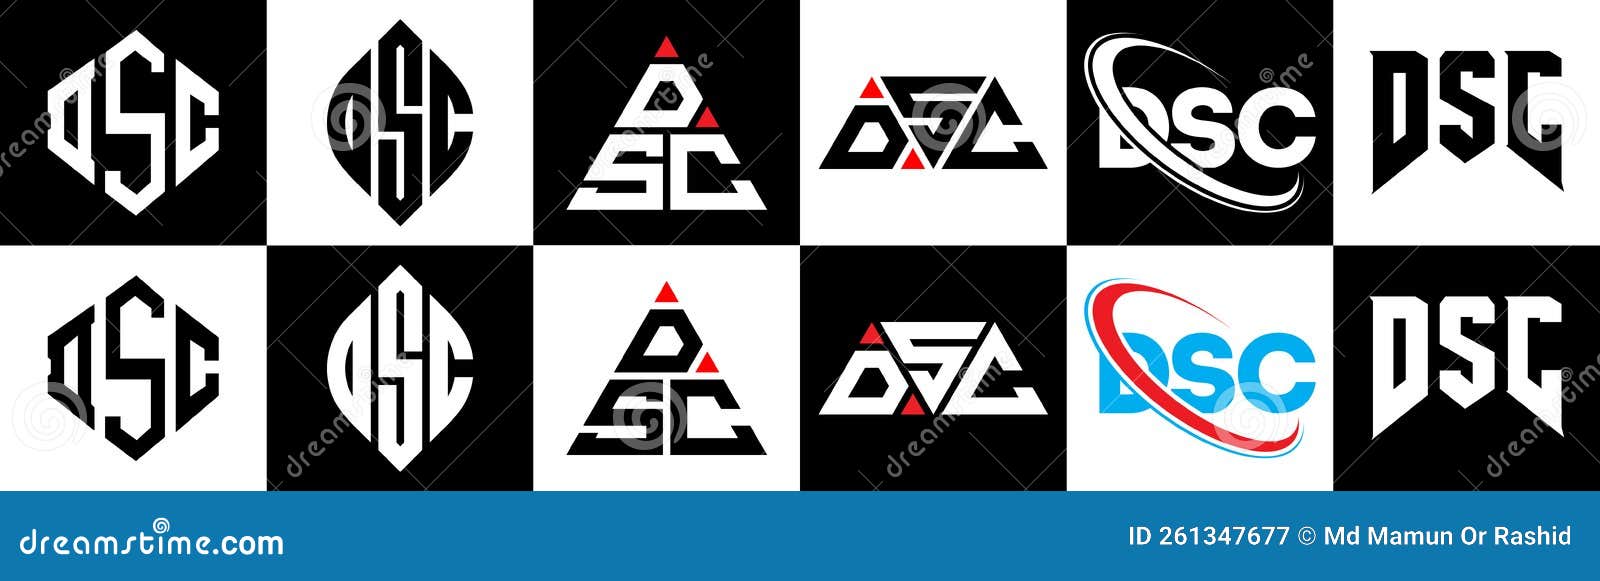 dsc letter logo  in six style. dsc polygon, circle, triangle, hexagon, flat and simple style with black and white color